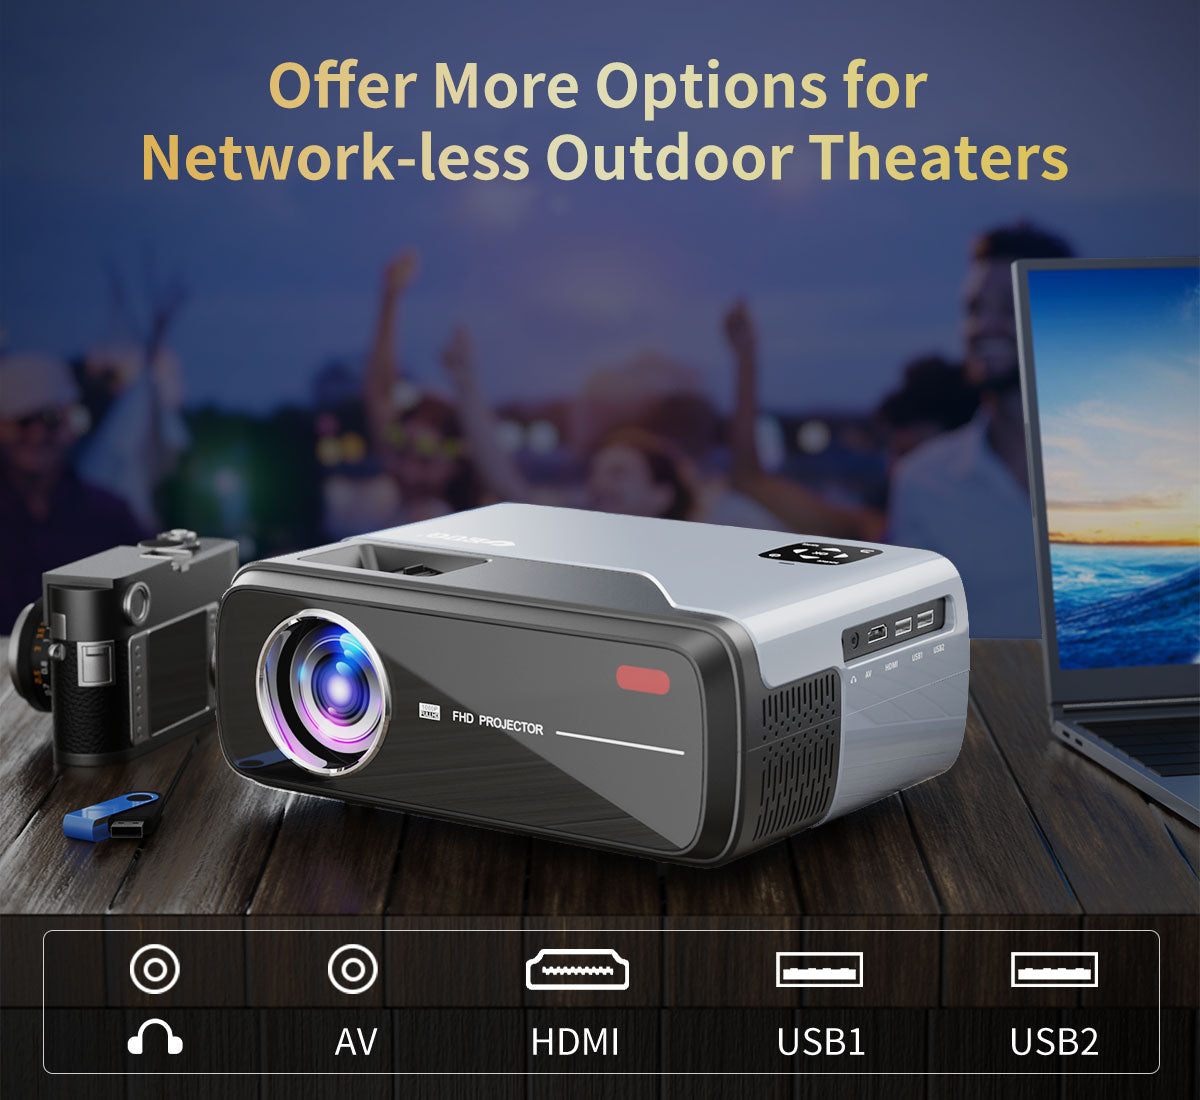 Portable 4K Movie Projector with WiFi Bluetooth,Smart Native 1080P Home Outdoor Projectors with Netflix Youtobe,LED Small Video Proyector for Home Theater Games Sports Laptop Phone Fire Stick